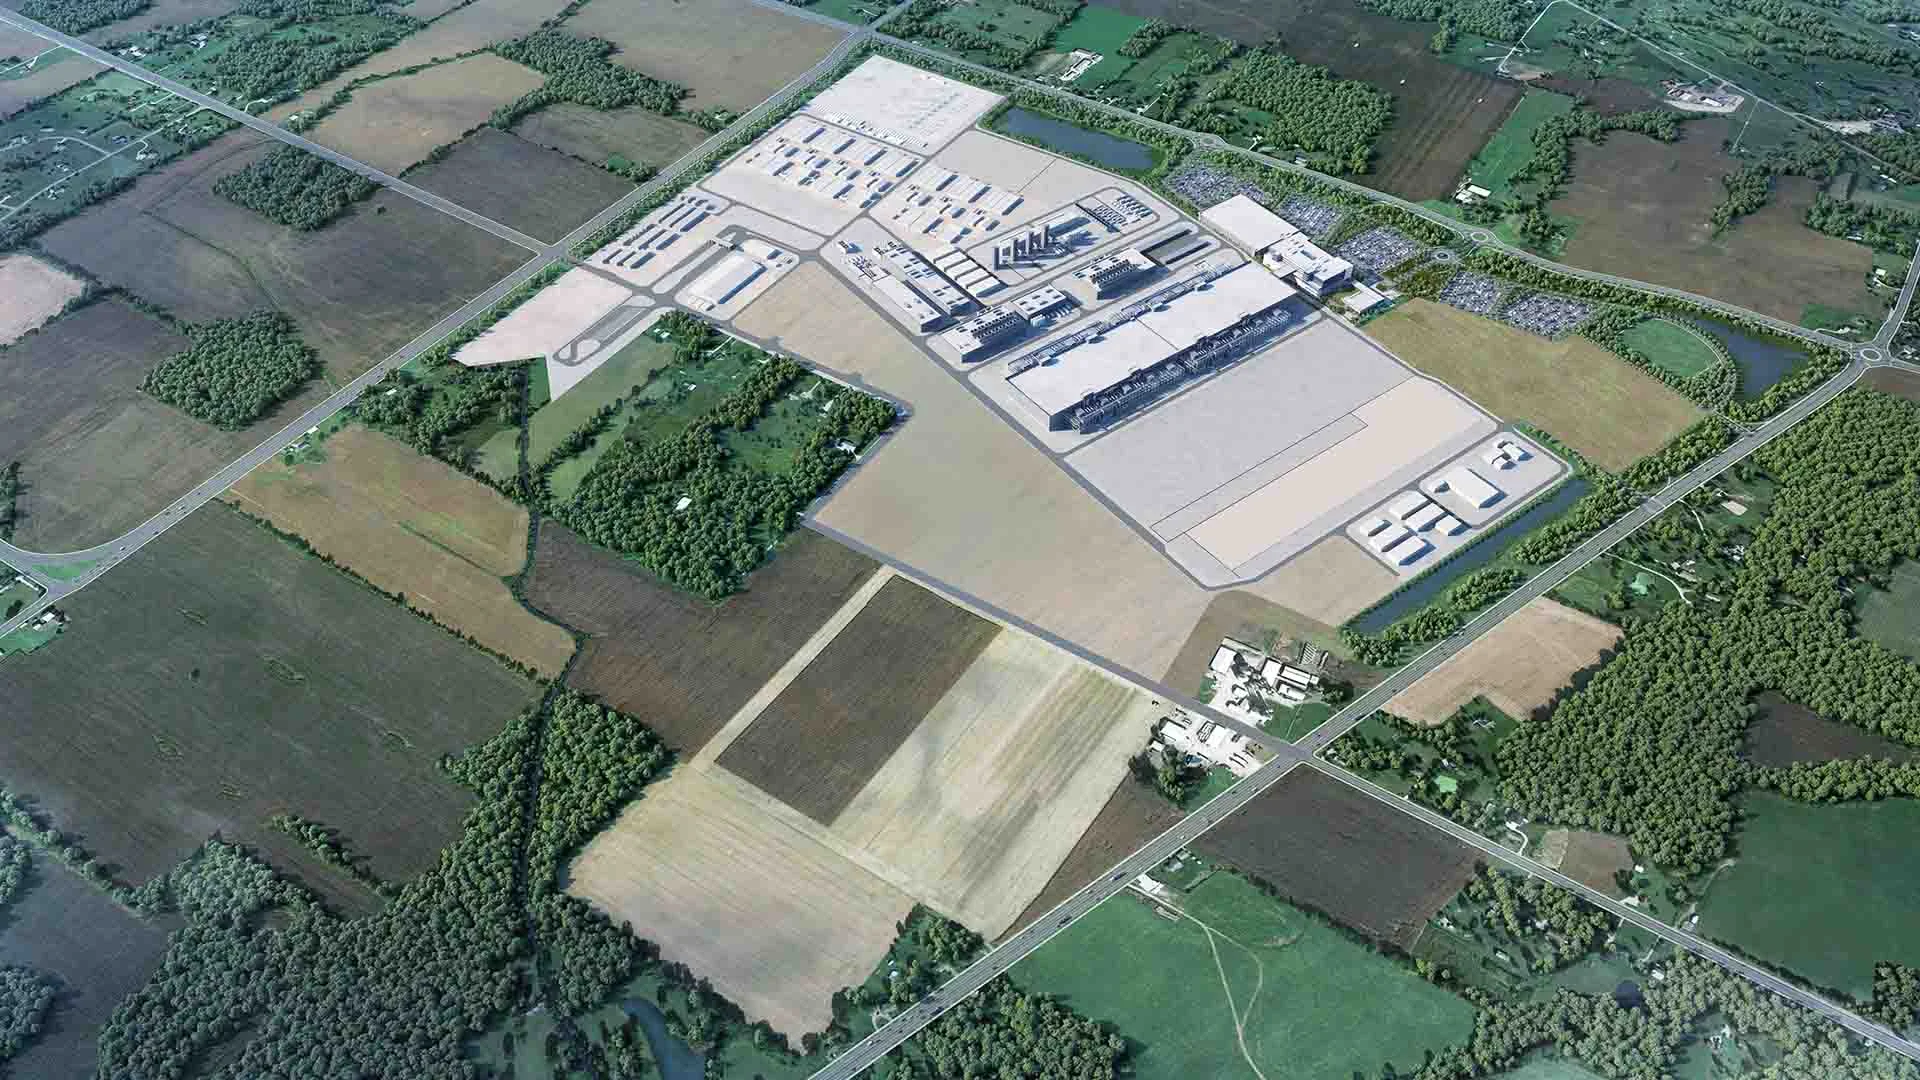 A rendering of the Intel facility using an aerial view